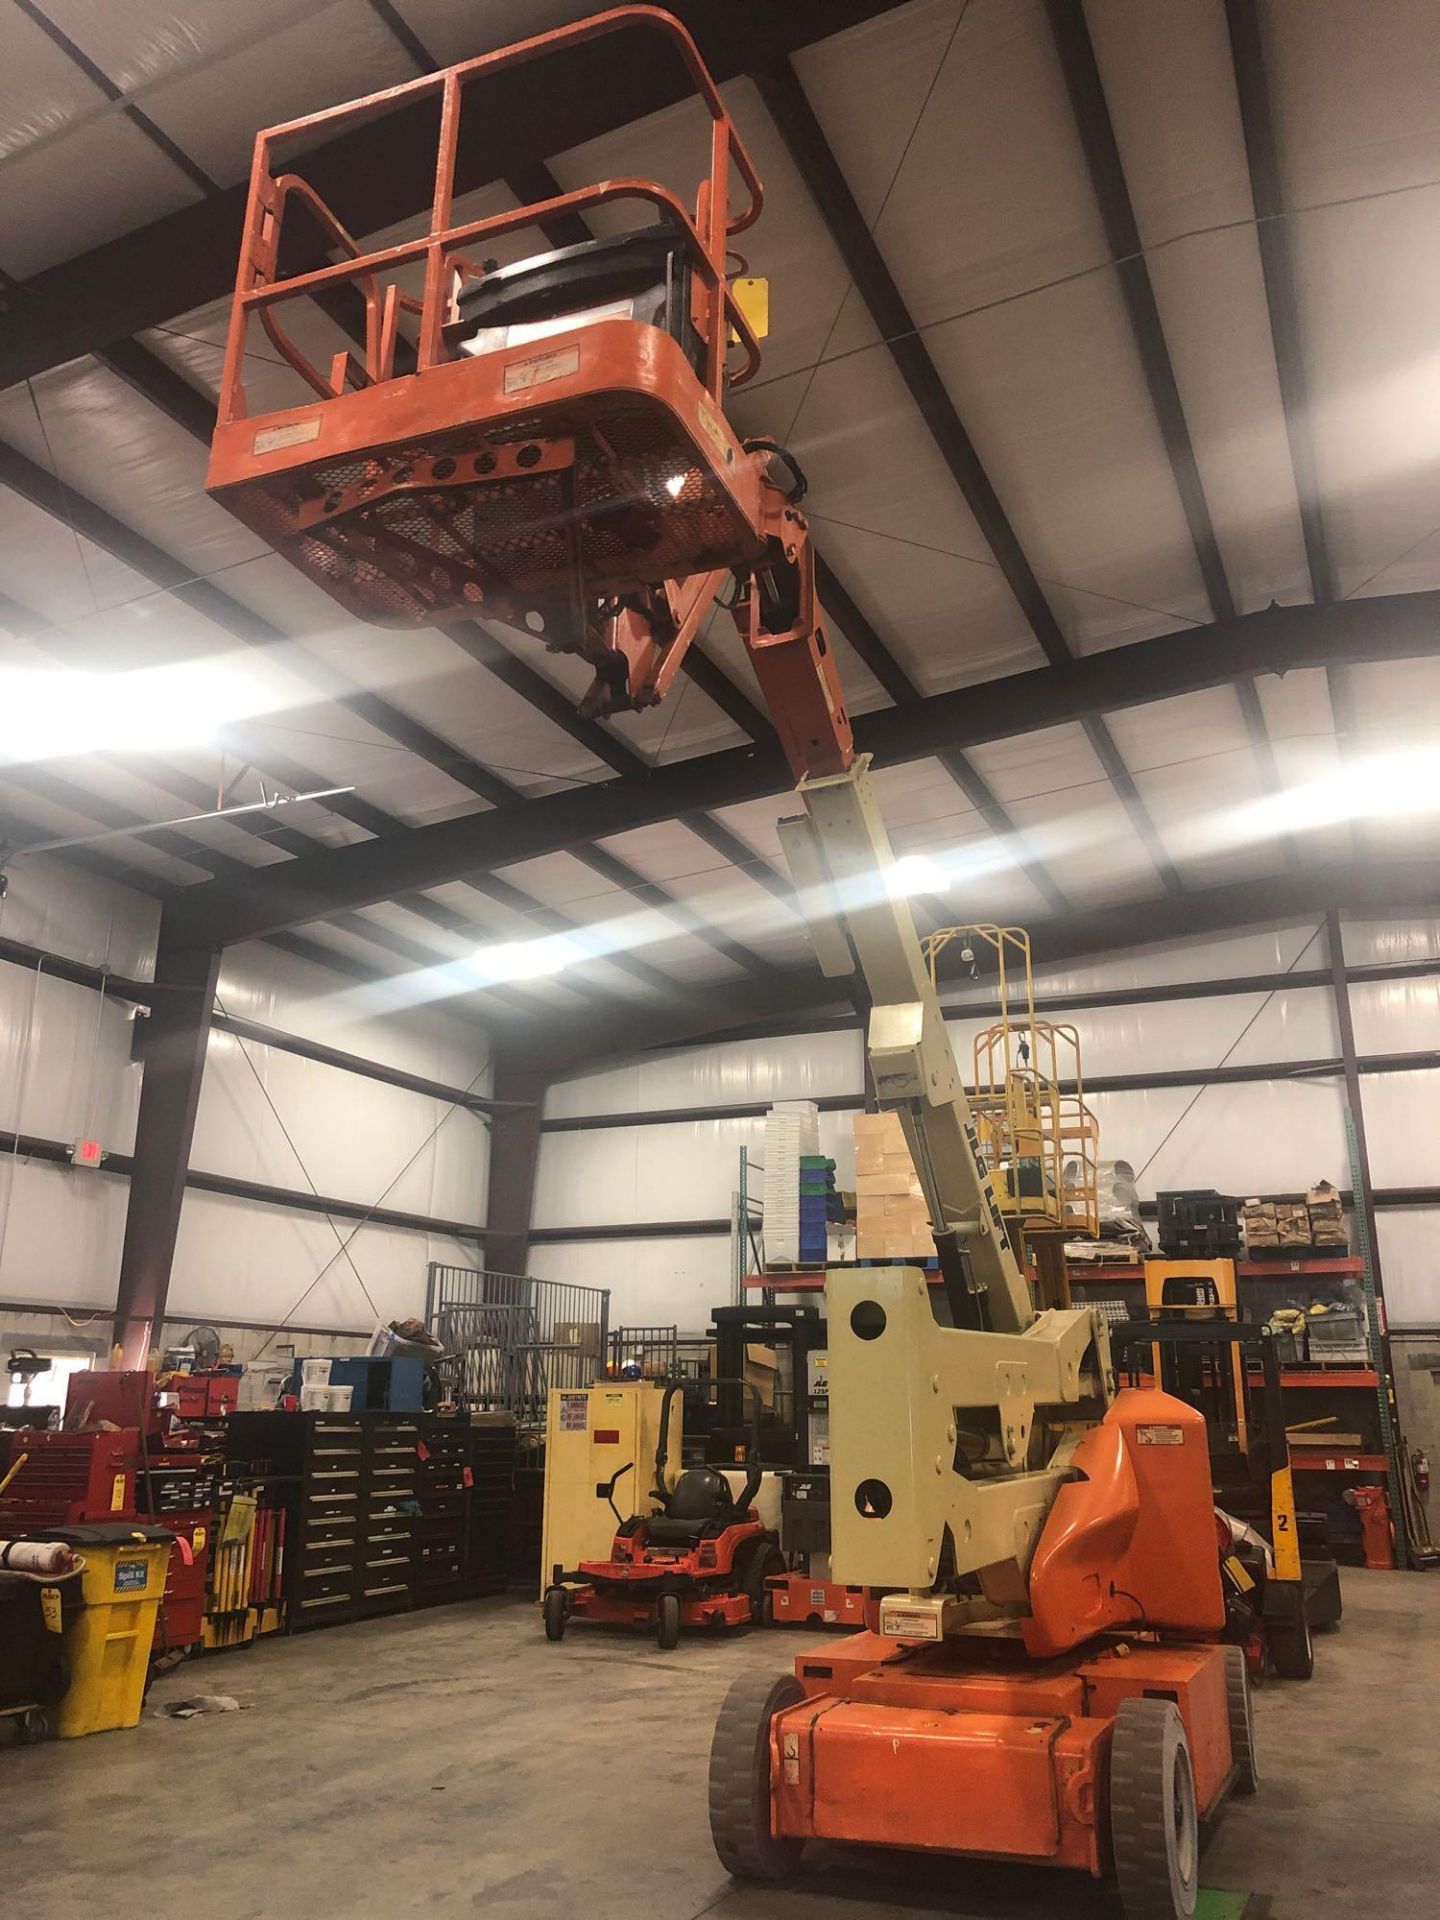 JLG E400AJN ELECTRIC ARTICULATING BOOM LIFT, 40' HEIGHT CAPACITY - Image 7 of 8